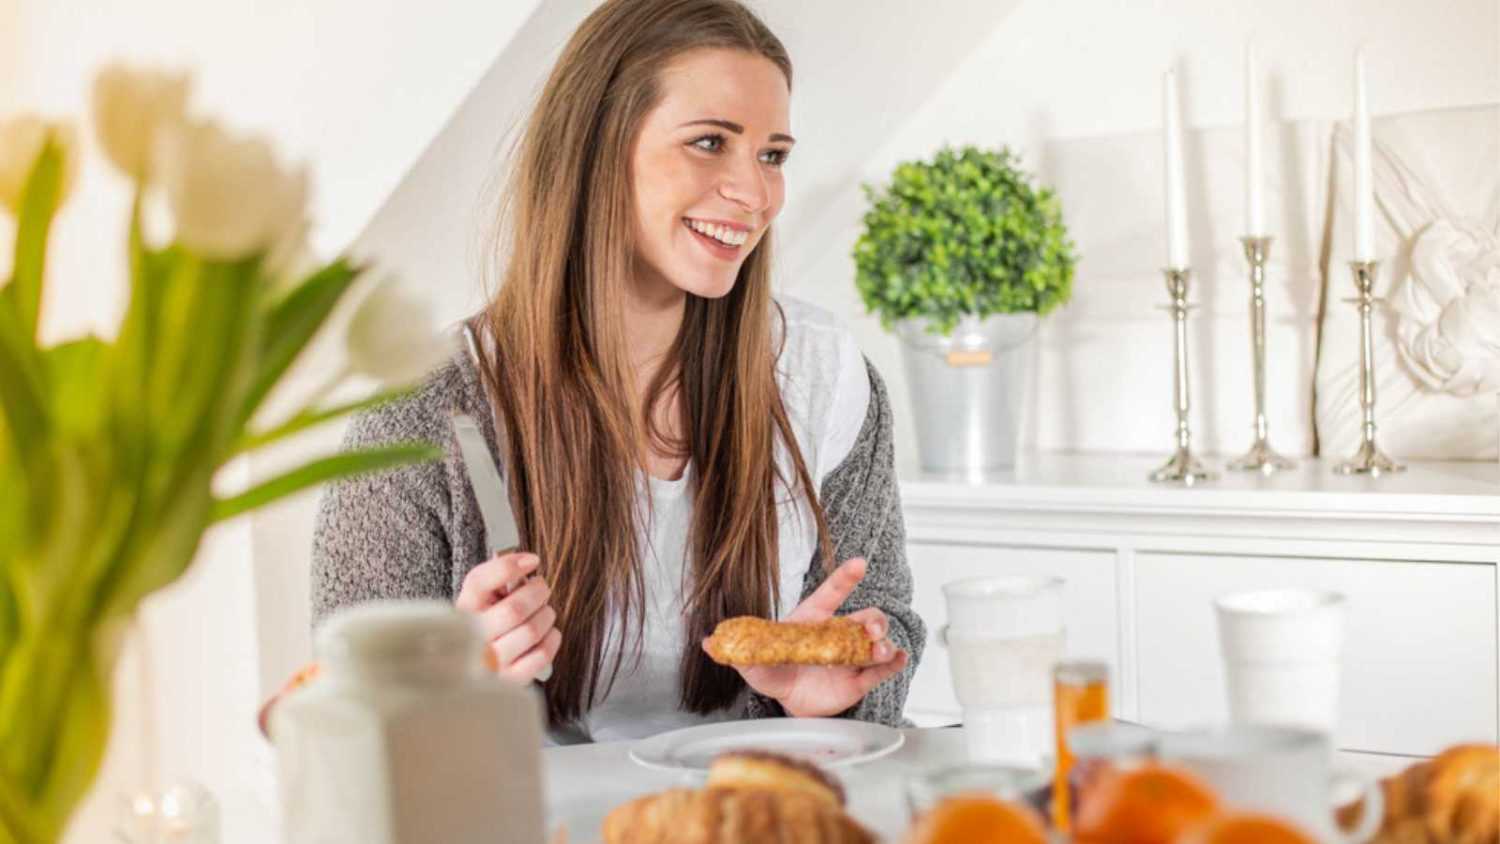 Young woman eating breakfast in the morning looking away to side with smile on face, natural expression.